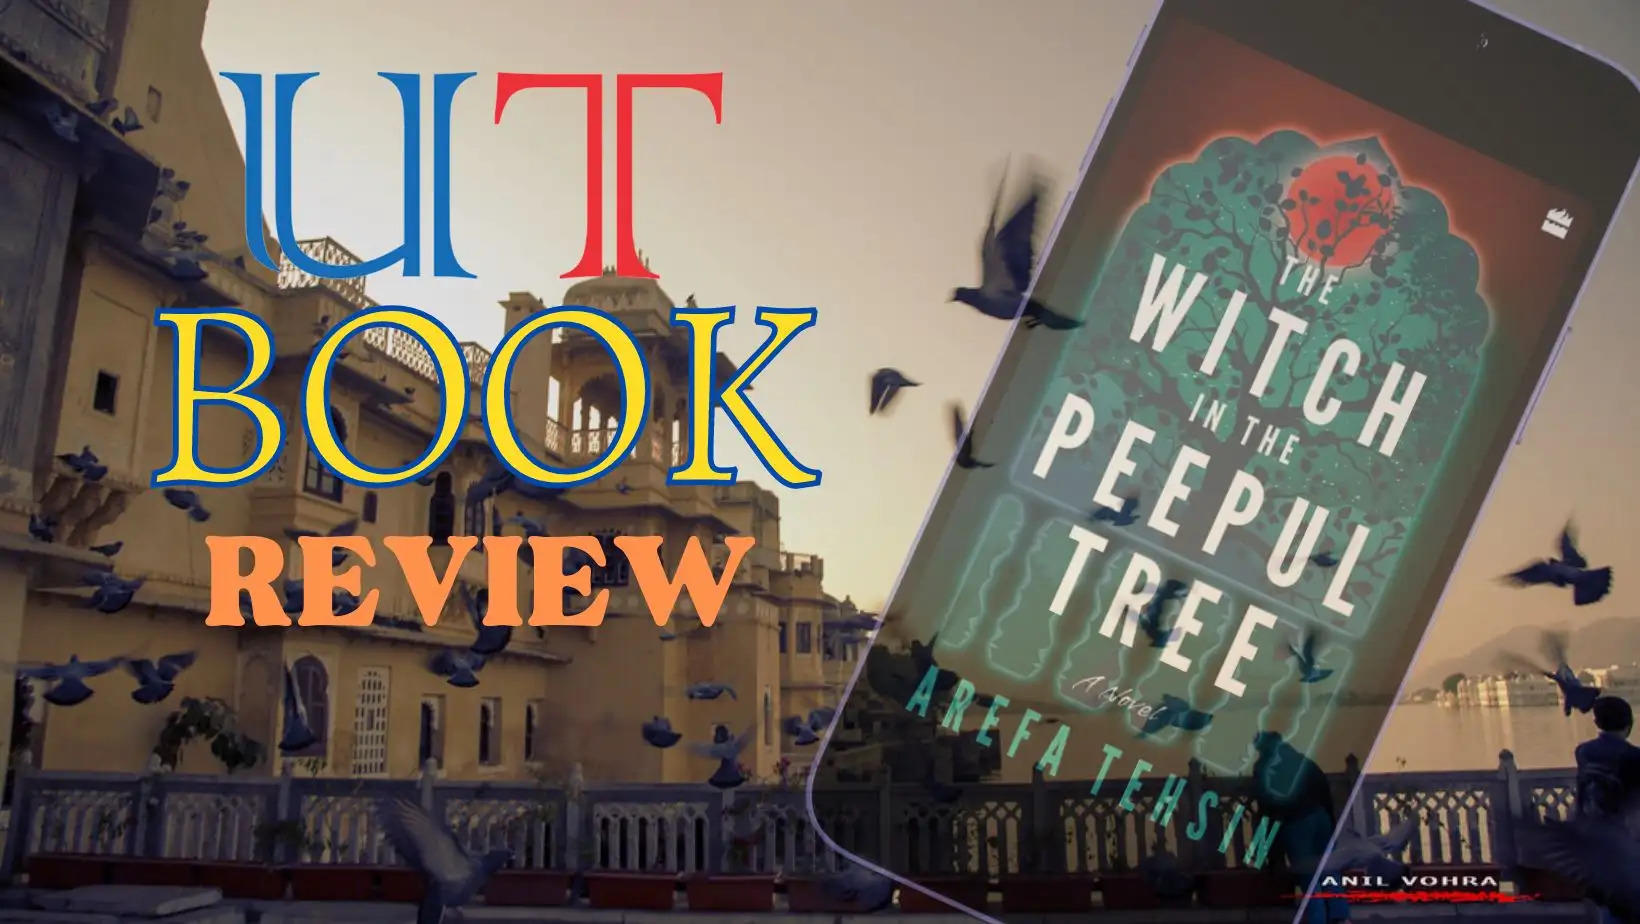 The  Witch of the Peepul Tree Arefa Tehsin People of Udaipur Book  Review Intriguing Murder Mystery, Bohras of Udaipur, Bohrawadi, Udaipur